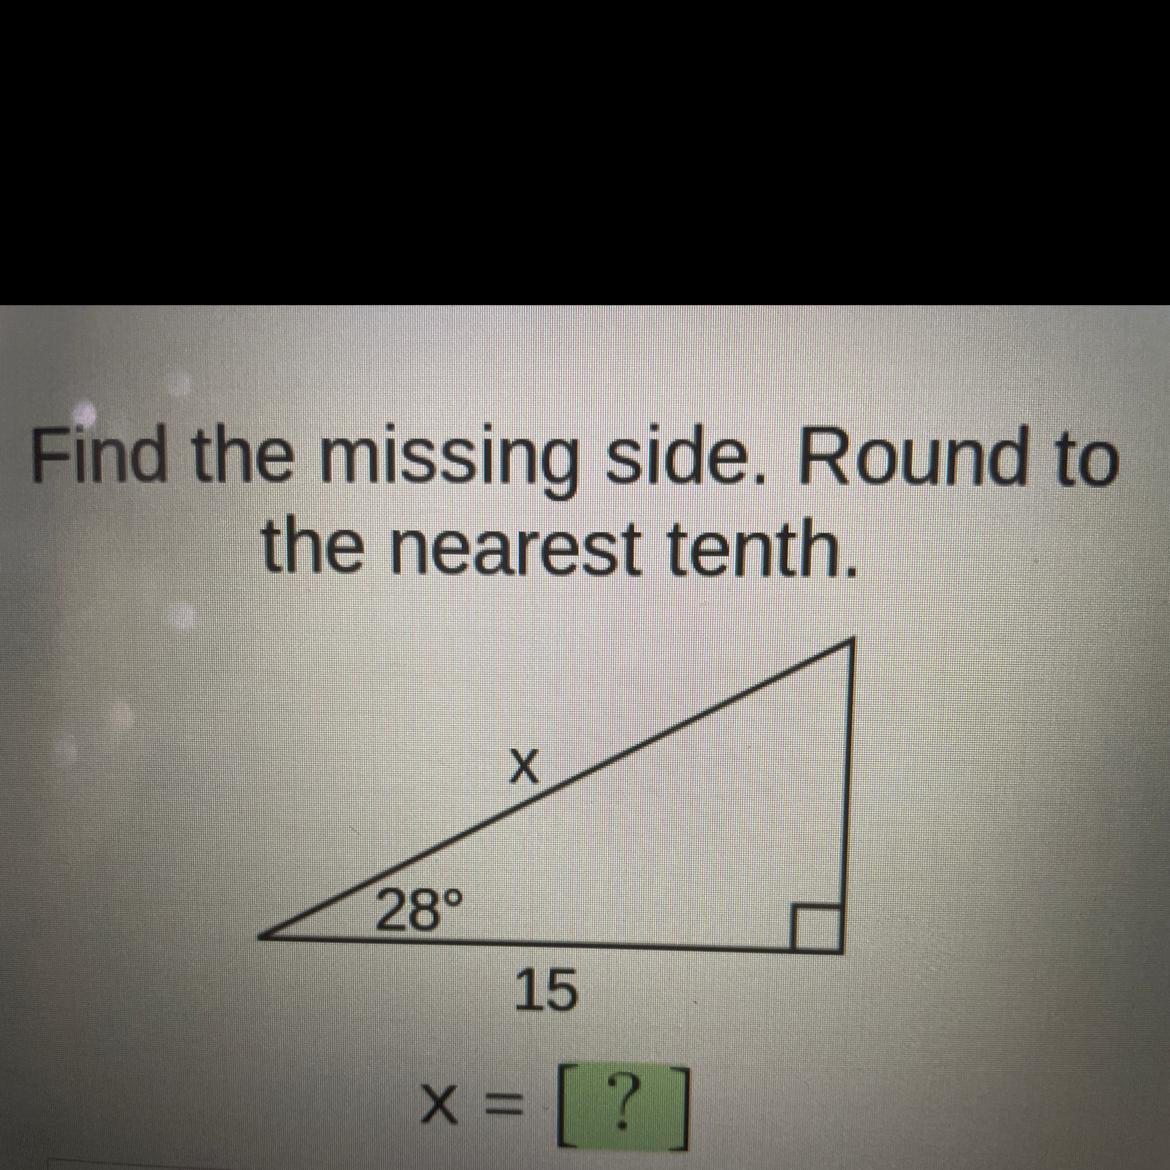 Find The Missing Side. Round Tothe Nearest Tenth.2815X == [?]